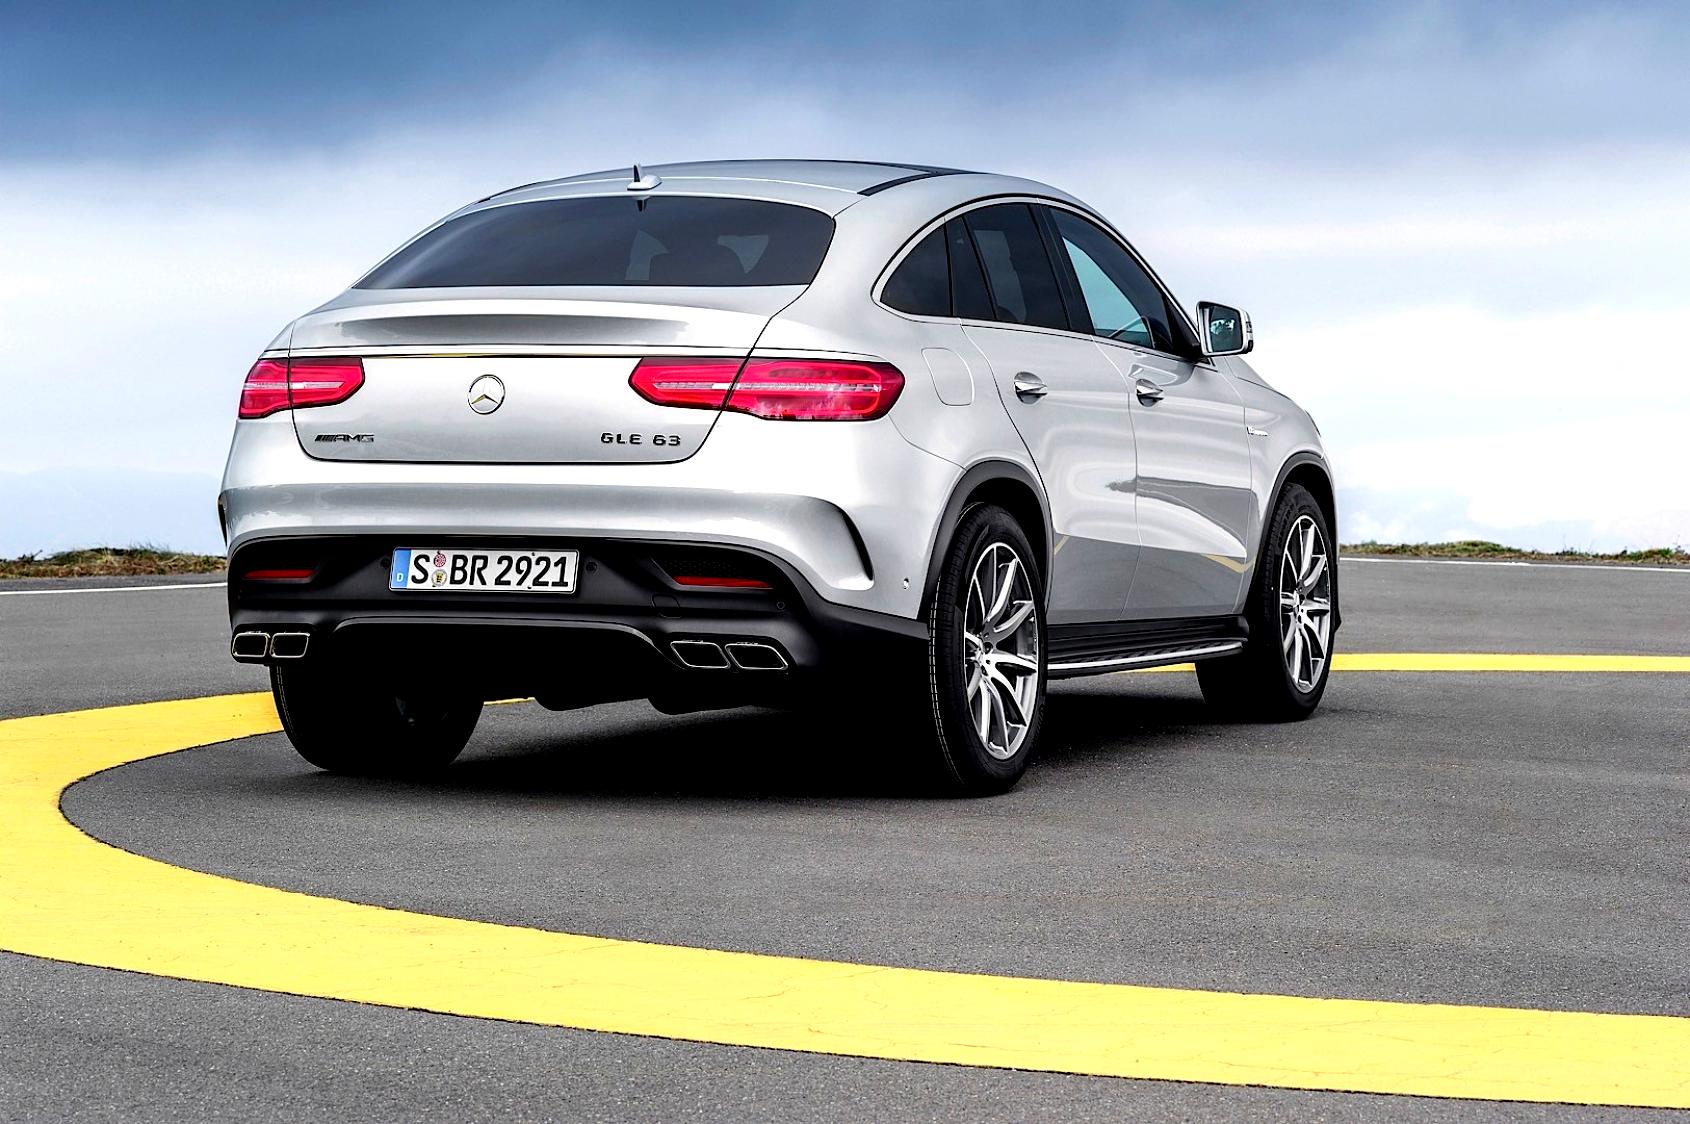 Mercedes Benz GLE Coupe AMG 2015 #32